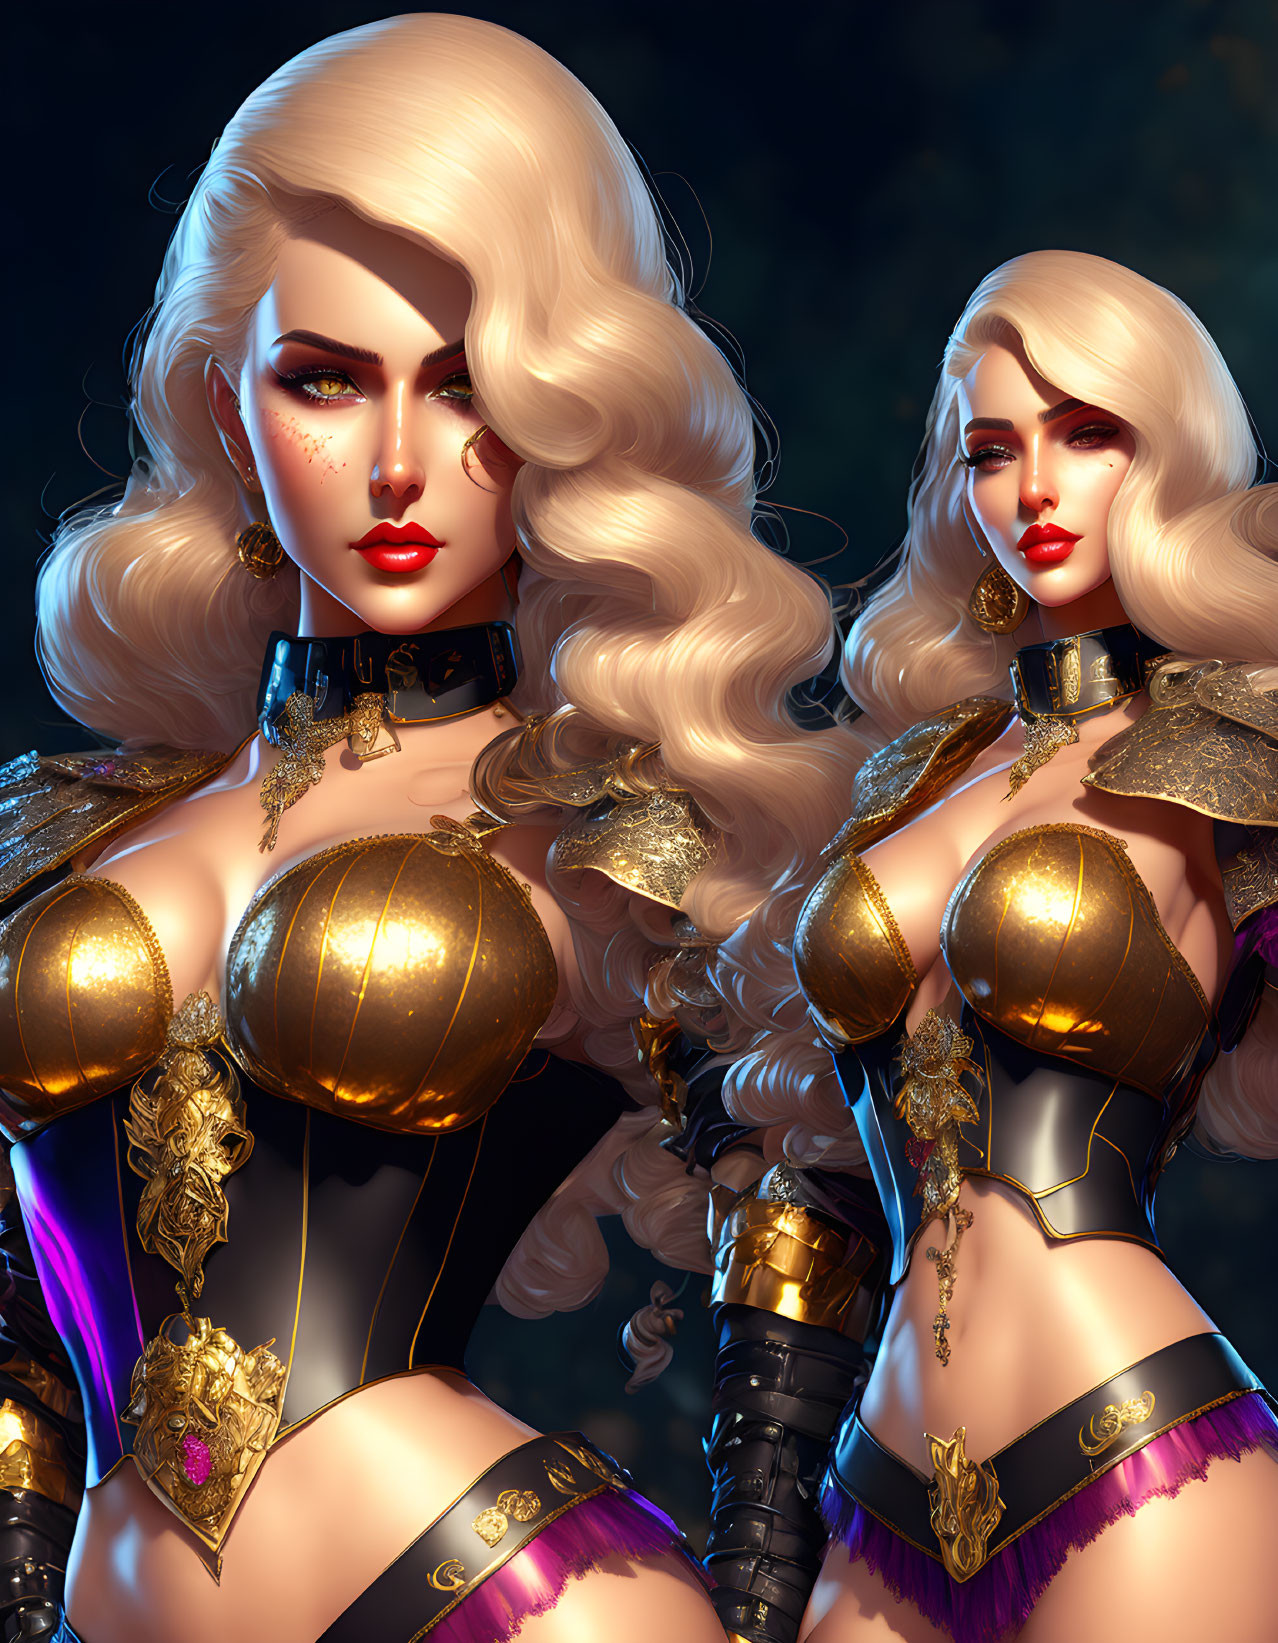 Identical Female Fantasy Characters in Golden Armor with Voluminous Blonde Hair